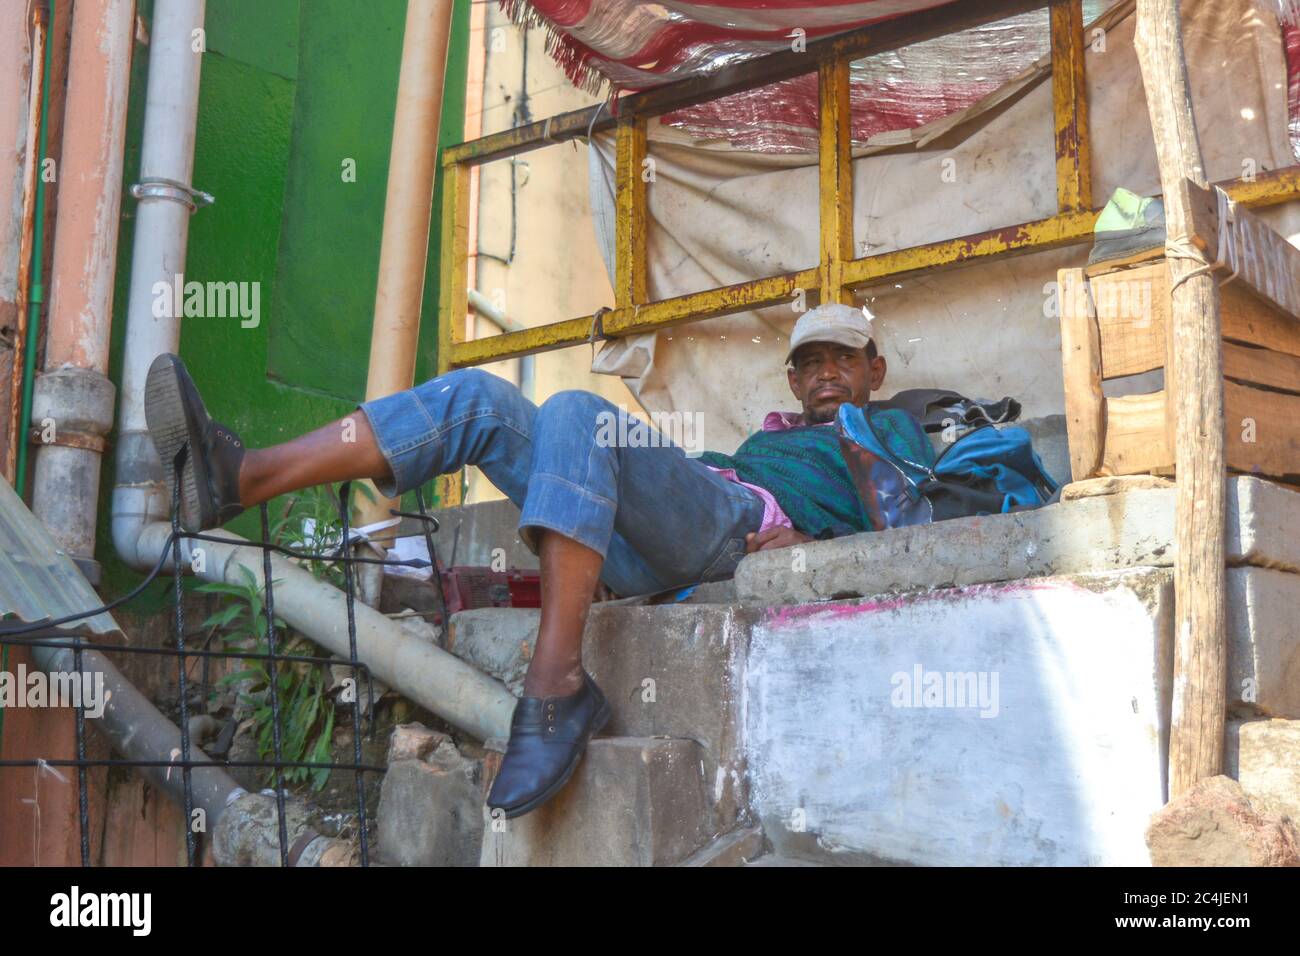 Antananarivo, Madagascar 05/17/20: A homeless man lies on the side of the street and tries to sleep. Economic ruin and unemployment as consequences of Stock Photo